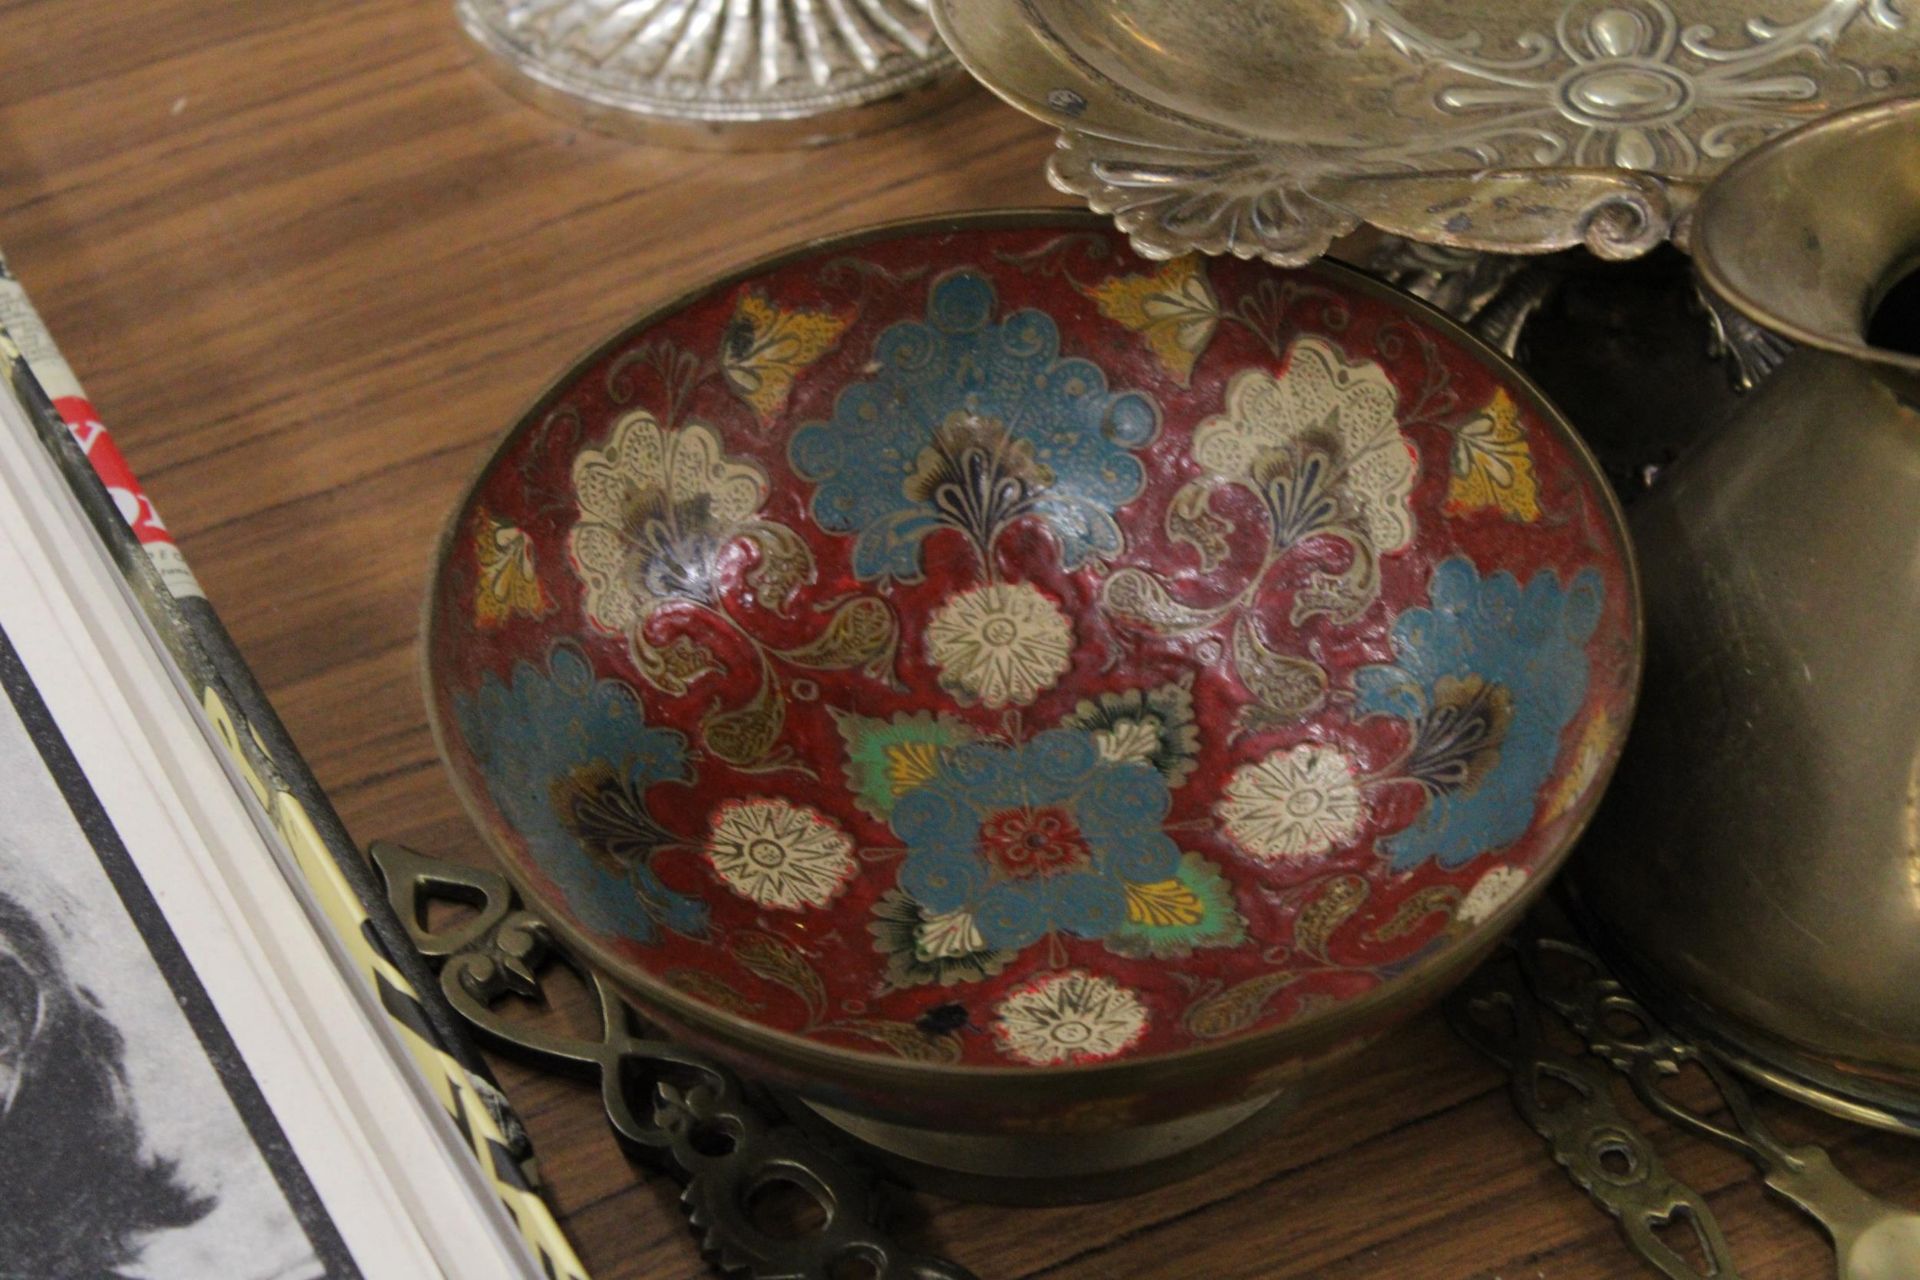 A SILVER PLATED CANDLEABRA AND ORNATE FOOTED BOWL, BRASS CLOISONNE FOOTED BOWL, PLUS BRASS JUG AND - Image 3 of 6